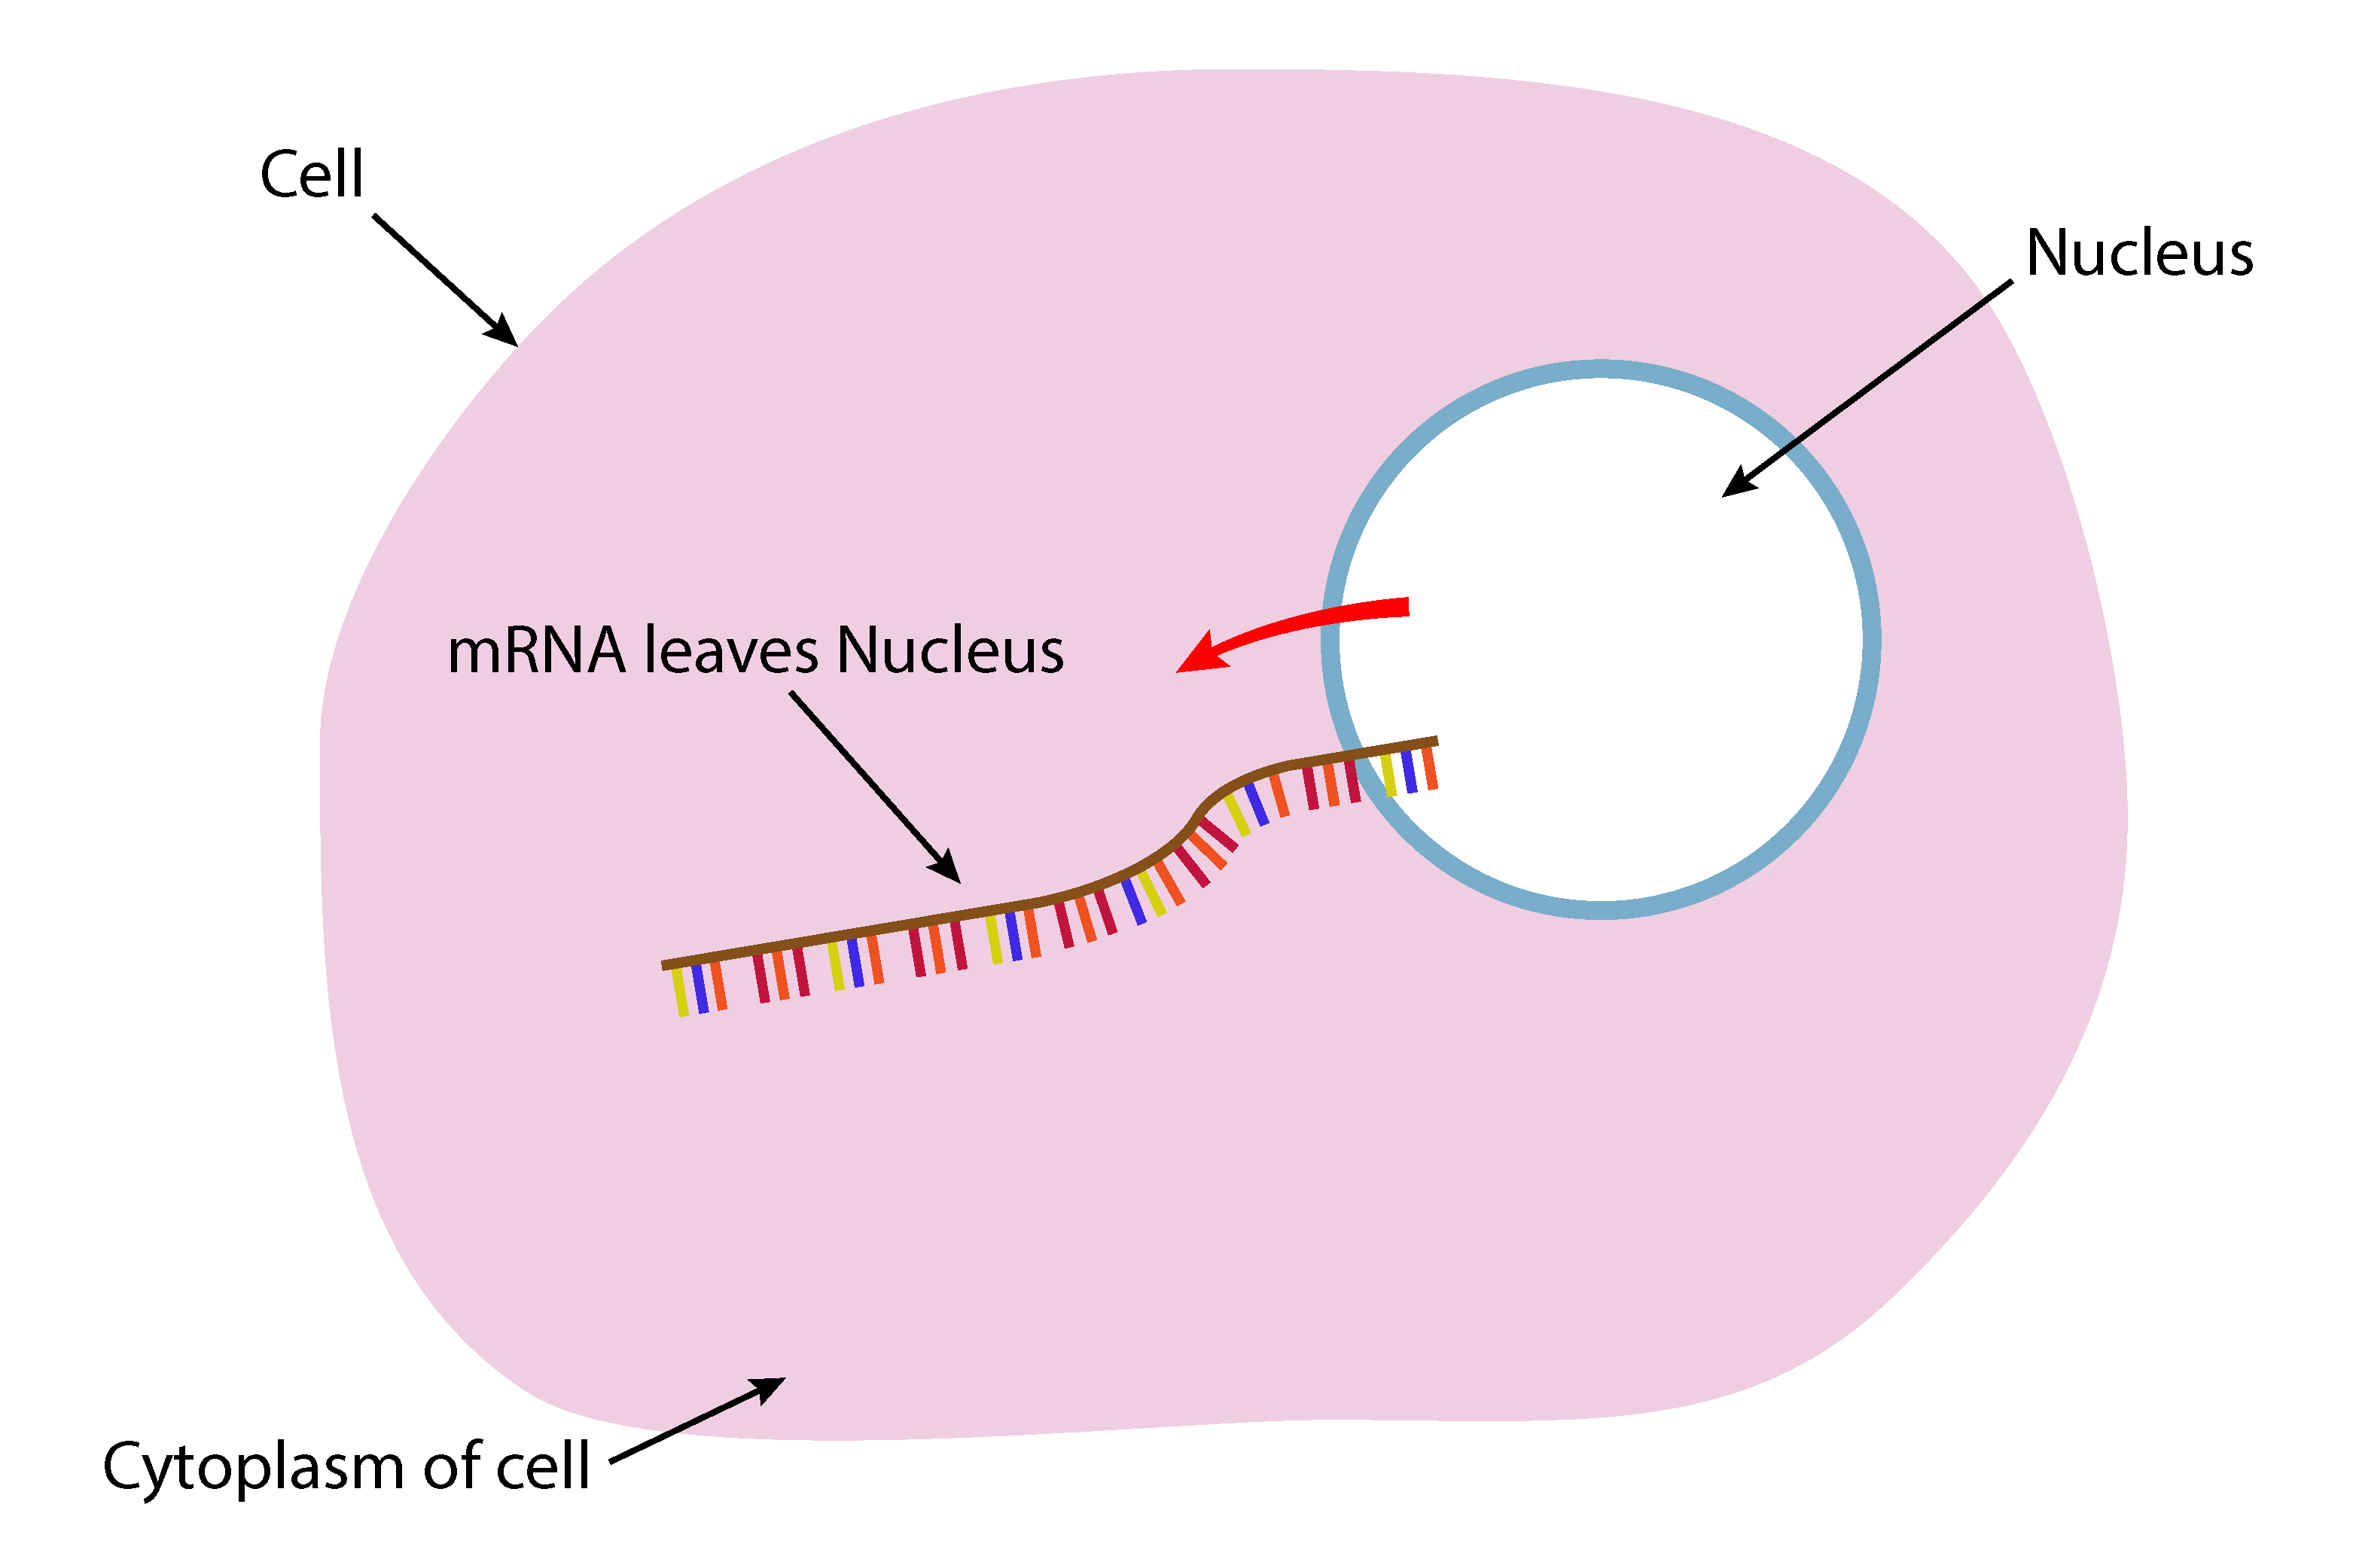 Because of the base change mRNA can leave the nucleus to the cytoplasm